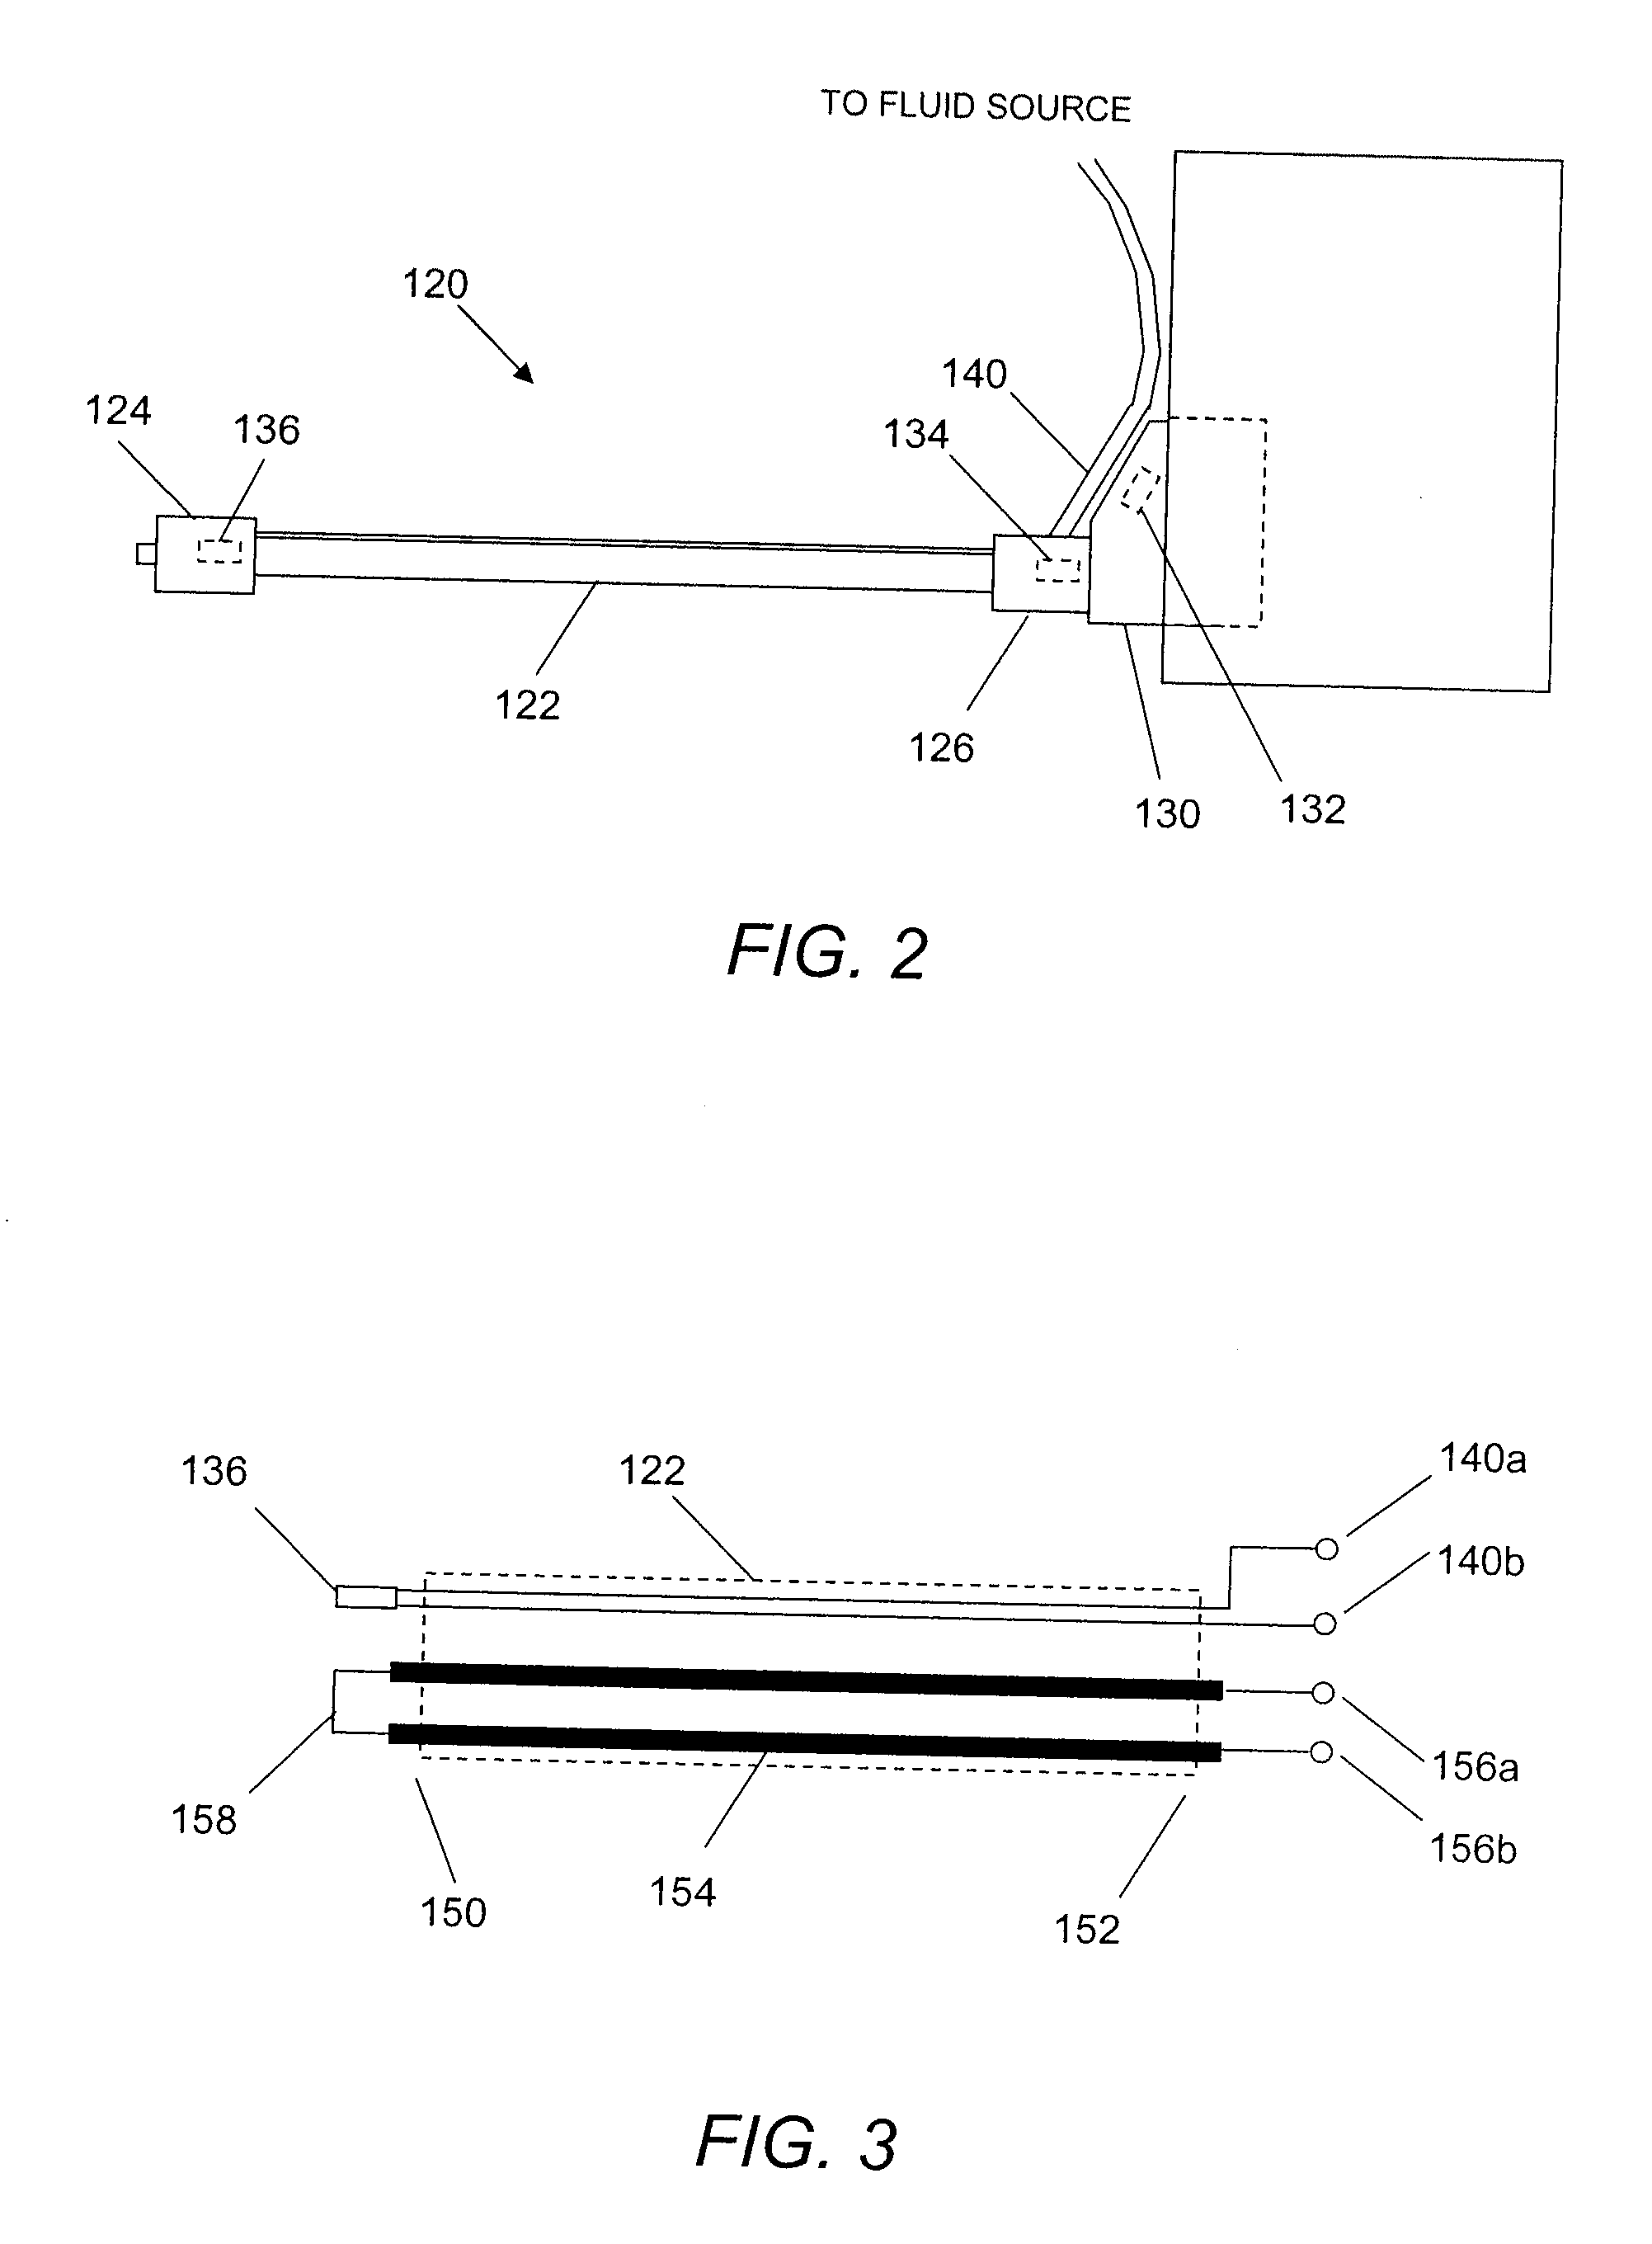 Method and apparatus for warming or cooling a fluid